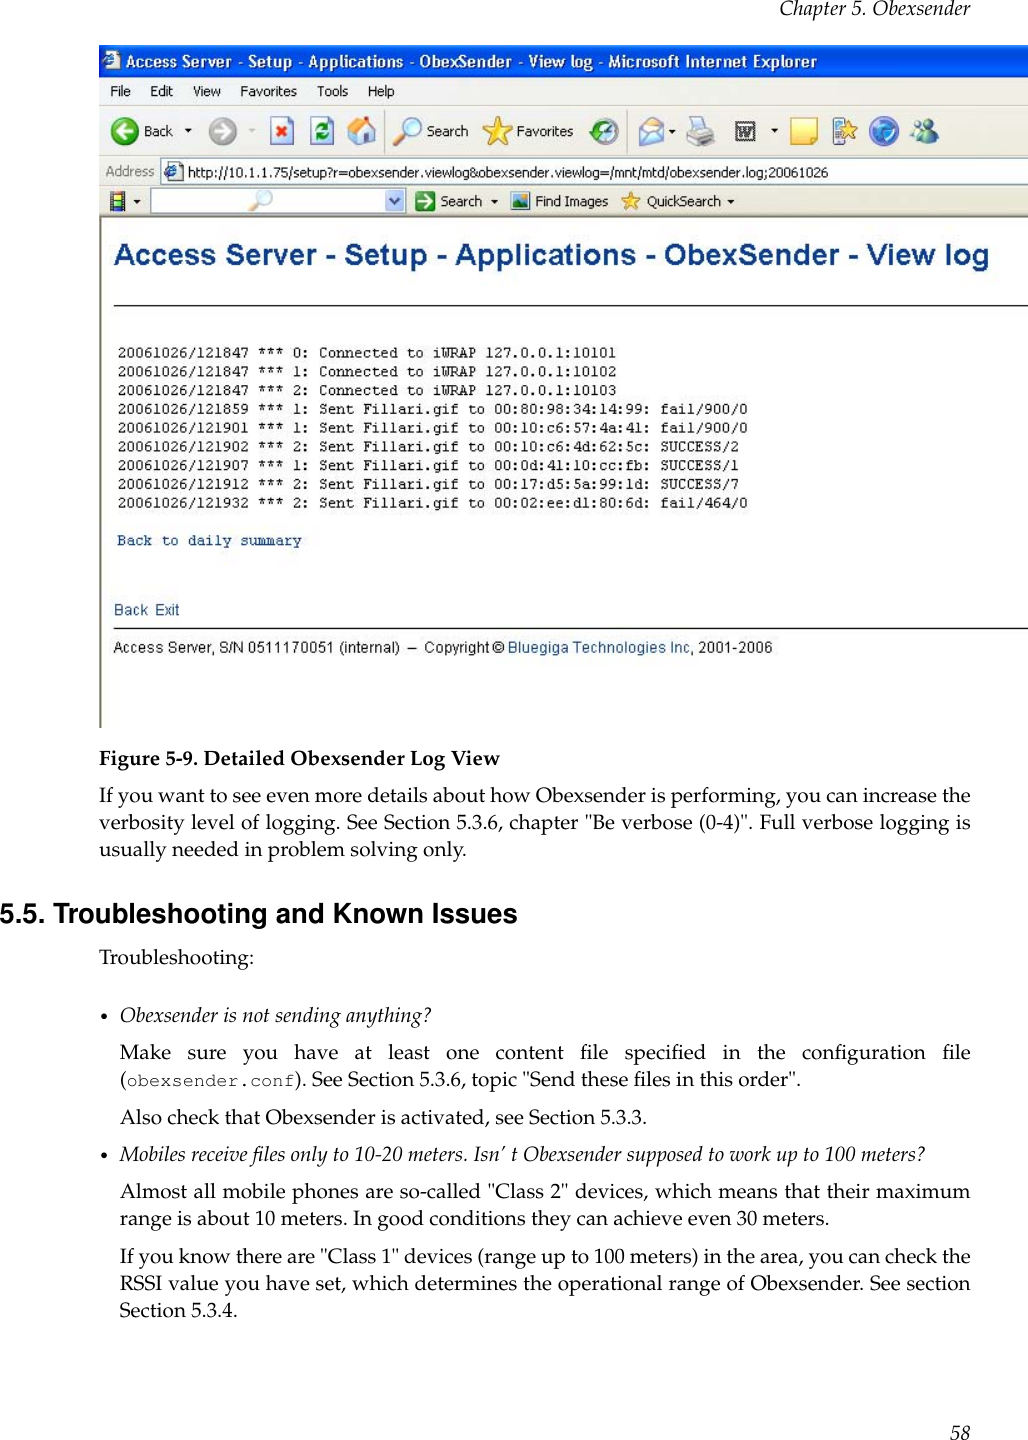 Chapter 5. ObexsenderFigure 5-9. Detailed Obexsender Log ViewIf you want to see even more details about how Obexsender is performing, you can increase theverbosity level of logging. See Section 5.3.6, chapter &quot;Be verbose (0-4)&quot;. Full verbose logging isusually needed in problem solving only.5.5. Troubleshooting and Known IssuesTroubleshooting:•Obexsender is not sending anything?Make sure you have at least one content ﬁle speciﬁed in the conﬁguration ﬁle(obexsender.conf). See Section 5.3.6, topic &quot;Send these ﬁles in this order&quot;.Also check that Obexsender is activated, see Section 5.3.3.•Mobiles receive ﬁles only to 10-20 meters. Isn’ t Obexsender supposed to work up to 100 meters?Almost all mobile phones are so-called &quot;Class 2&quot; devices, which means that their maximumrange is about 10 meters. In good conditions they can achieve even 30 meters.If you know there are &quot;Class 1&quot; devices (range up to 100 meters) in the area, you can check theRSSI value you have set, which determines the operational range of Obexsender. See sectionSection 5.3.4.58